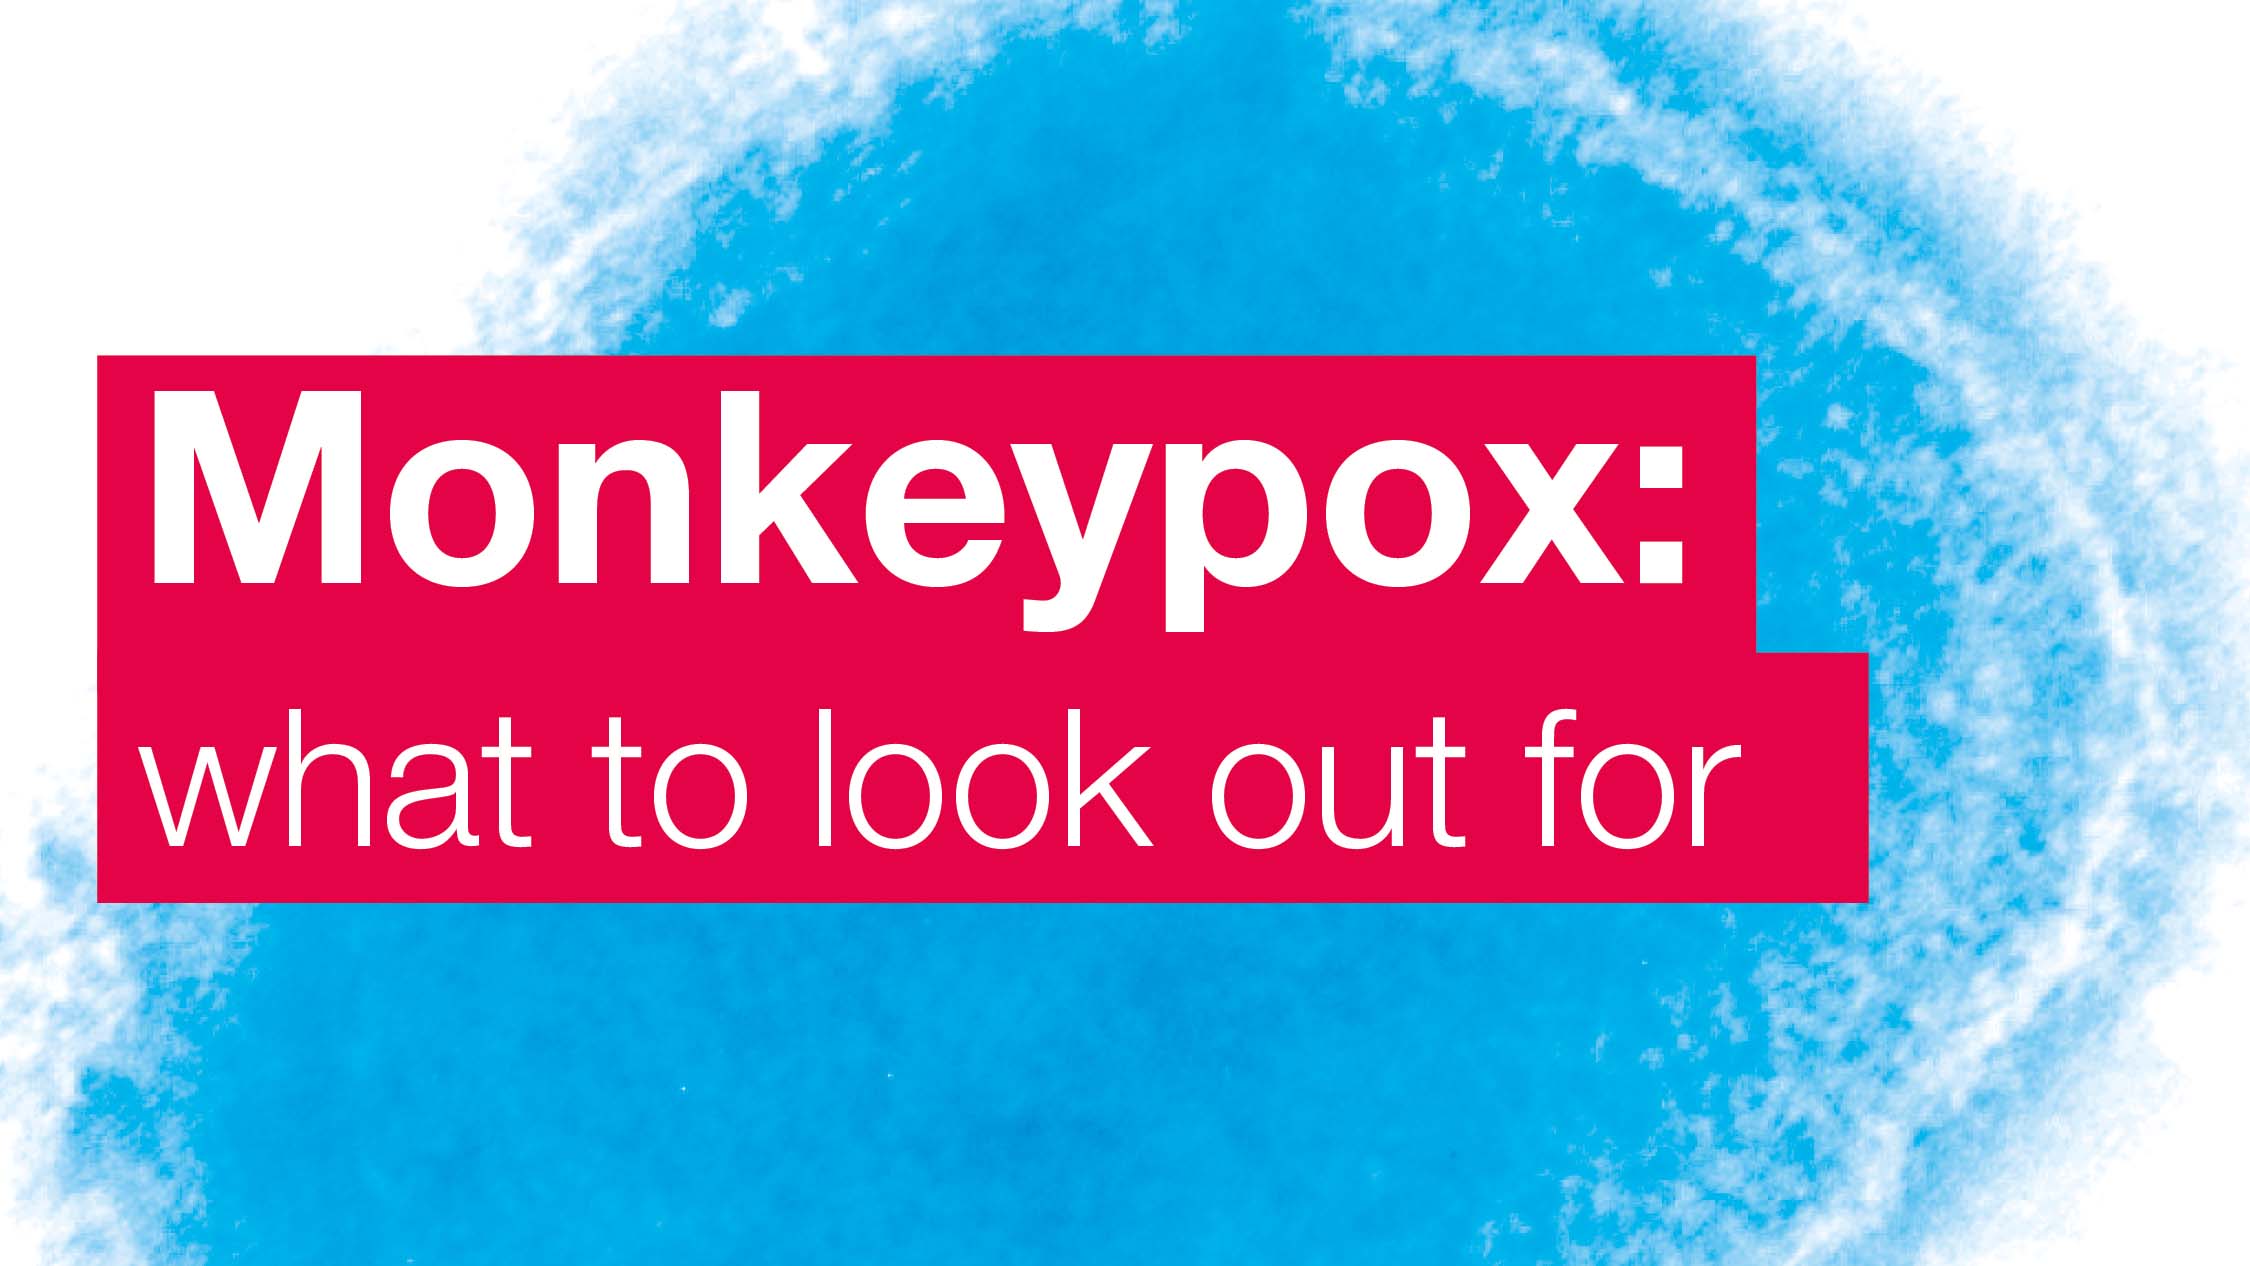 monkeypox what to look for art from UKHSA